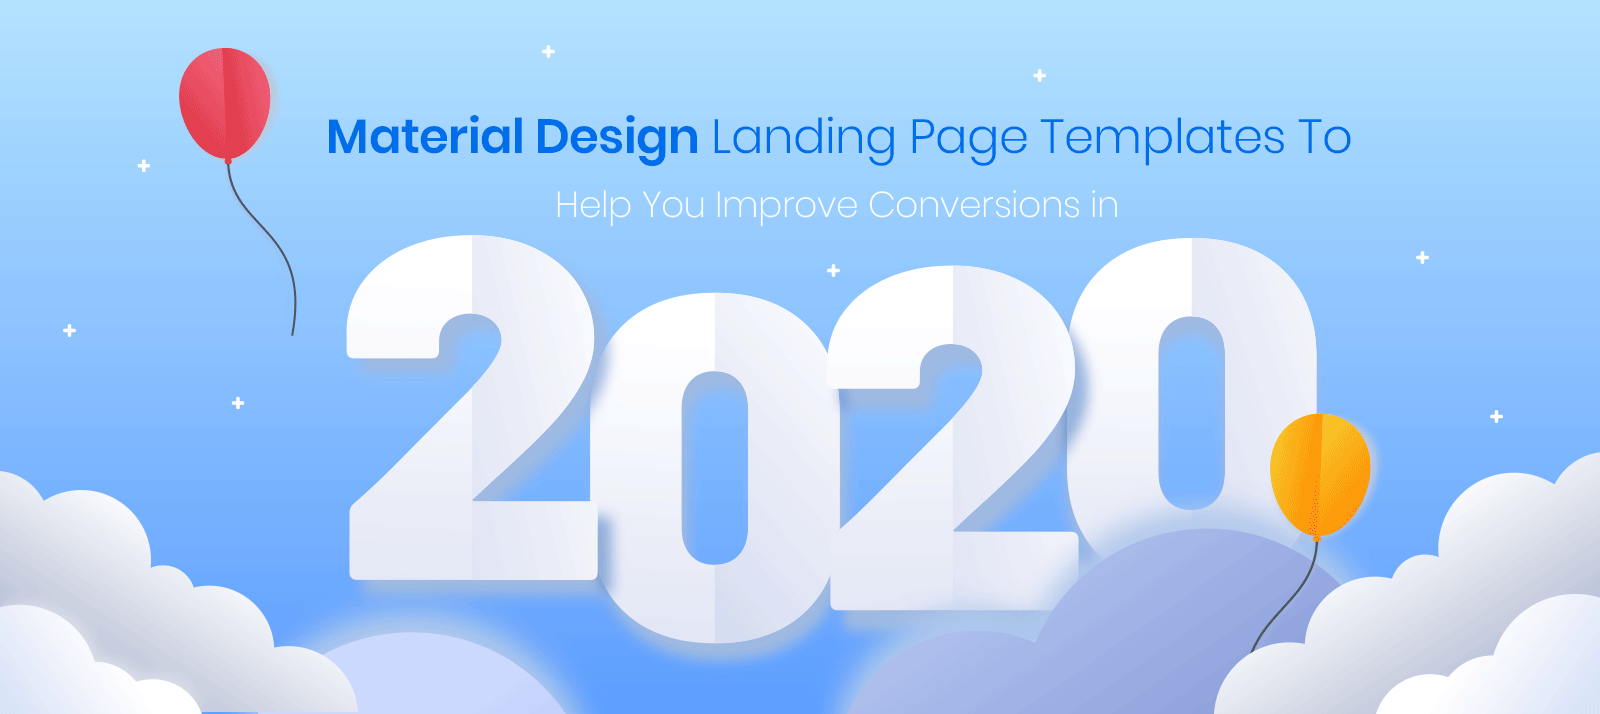  Material Design Landing Page Templates To Help You Improve Conversions in 2020 